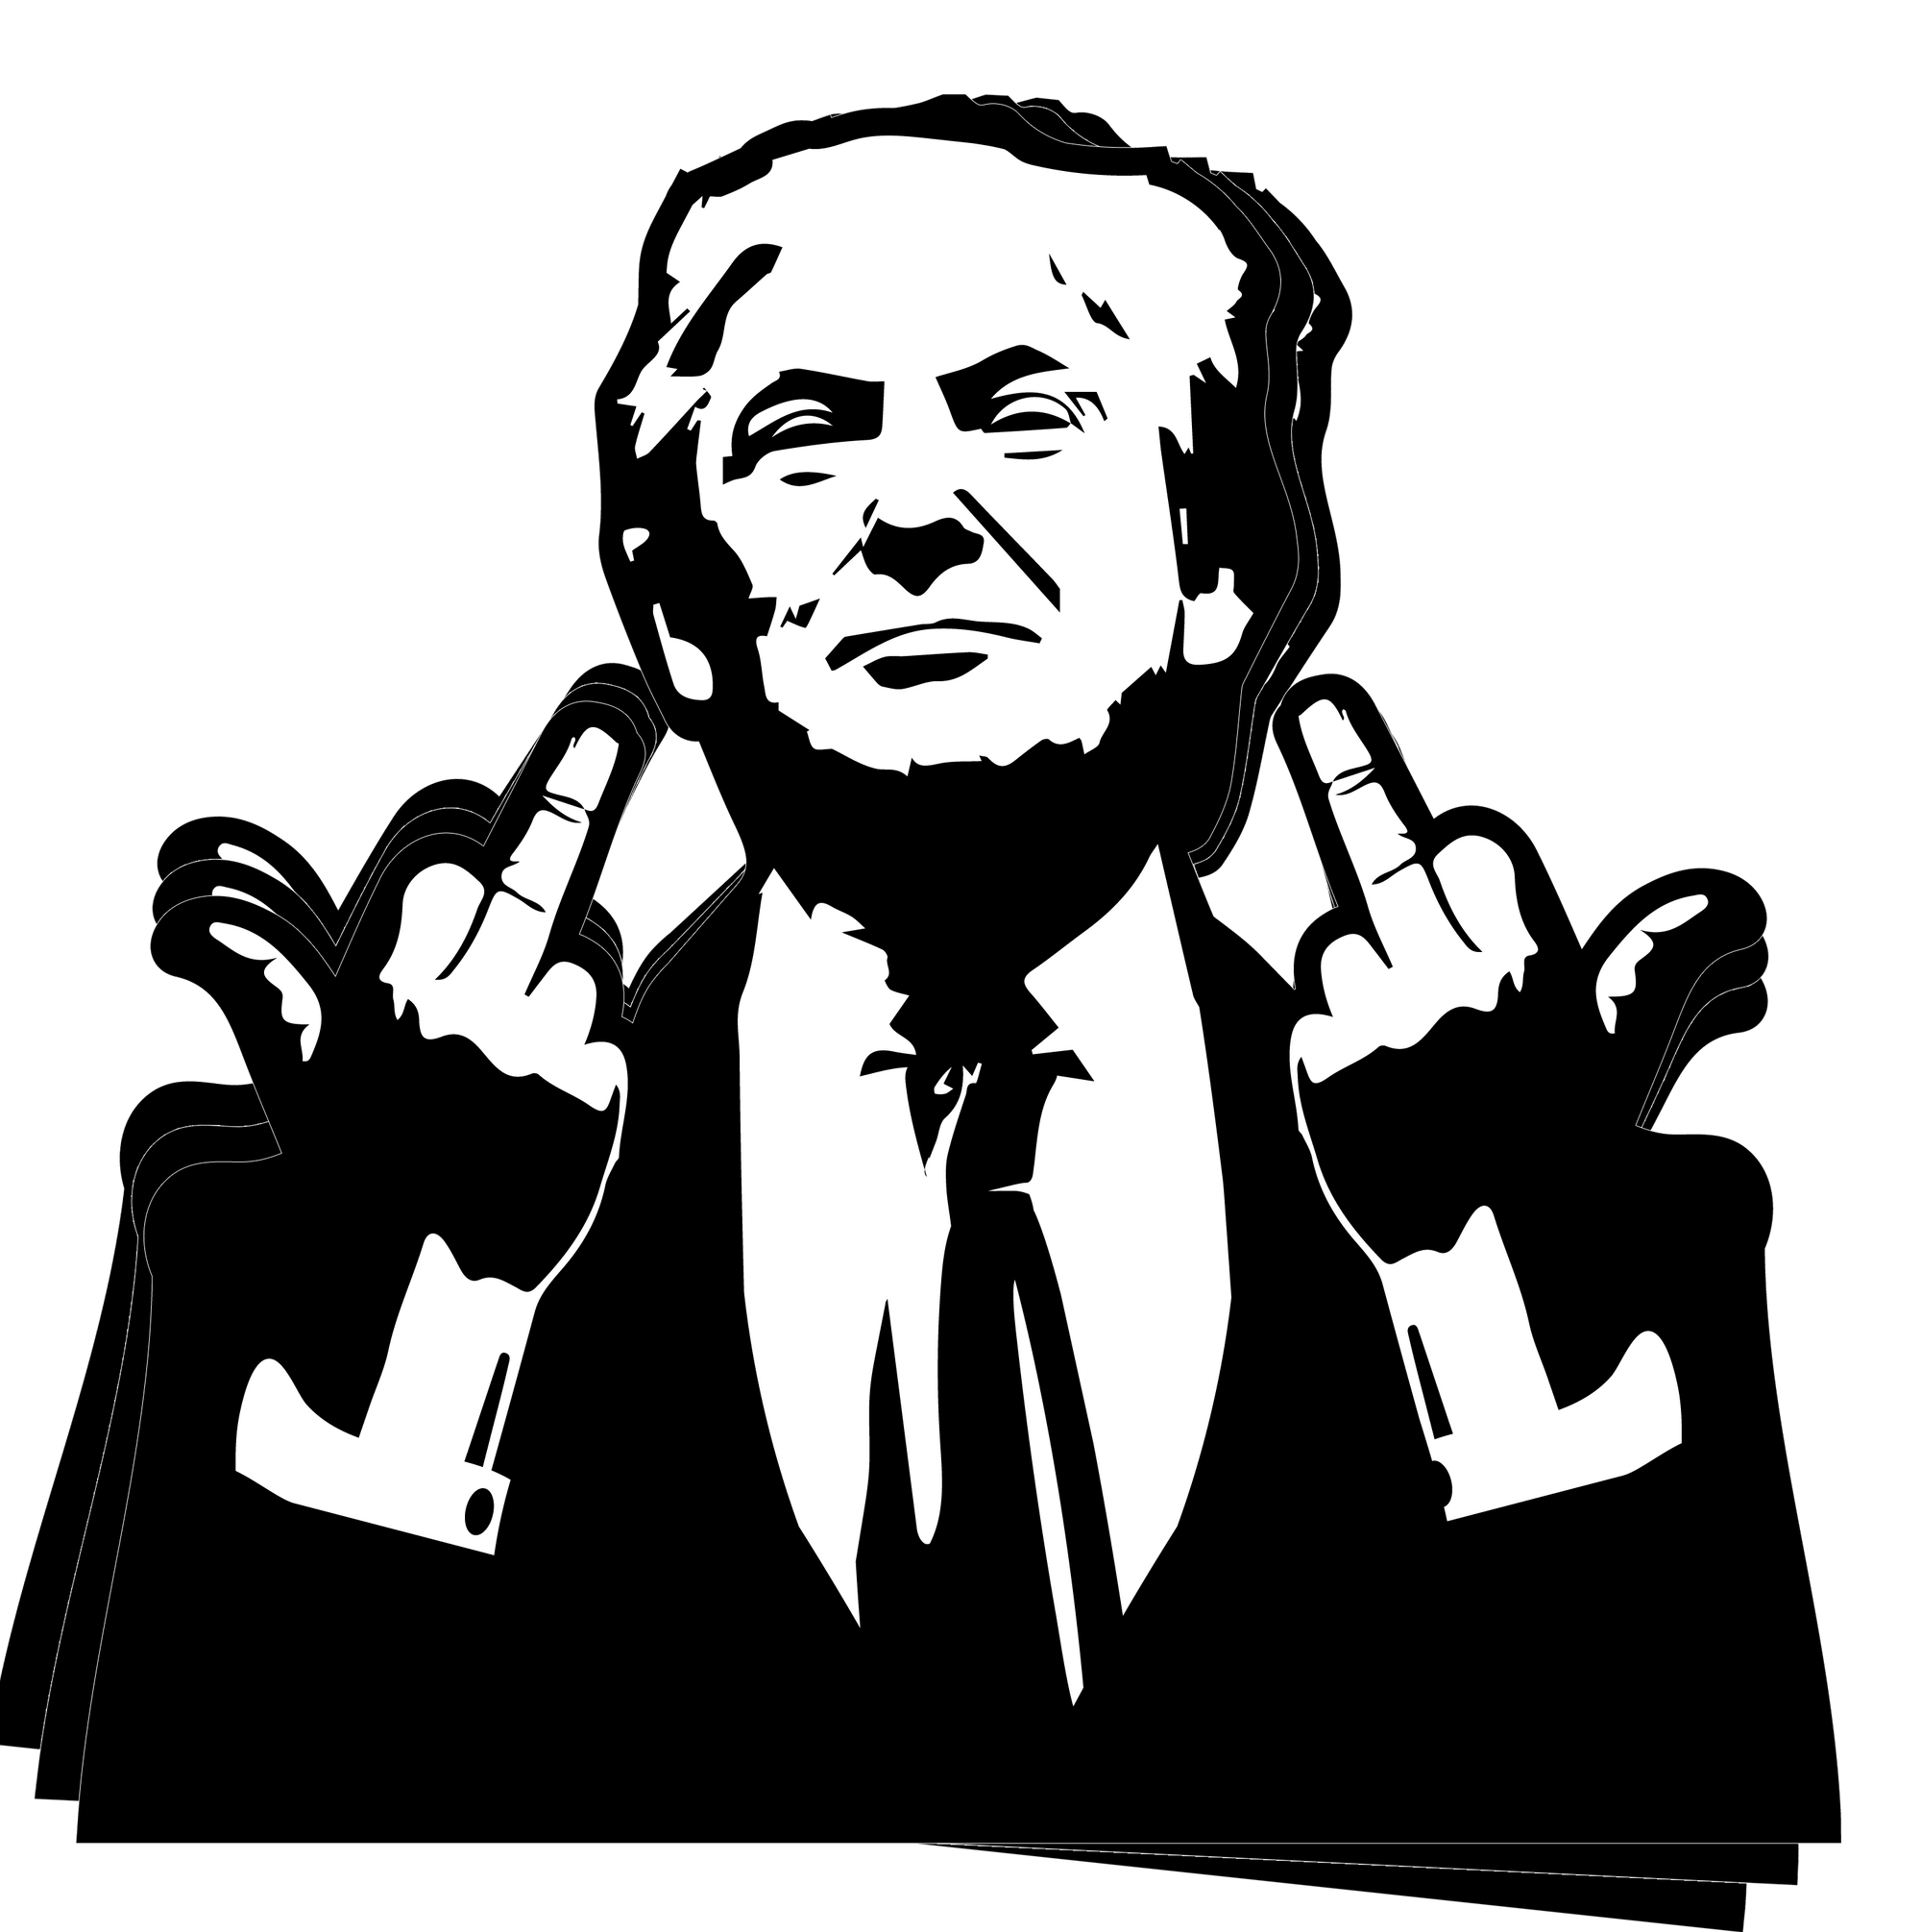 "Trump Middle Finger" - Decal